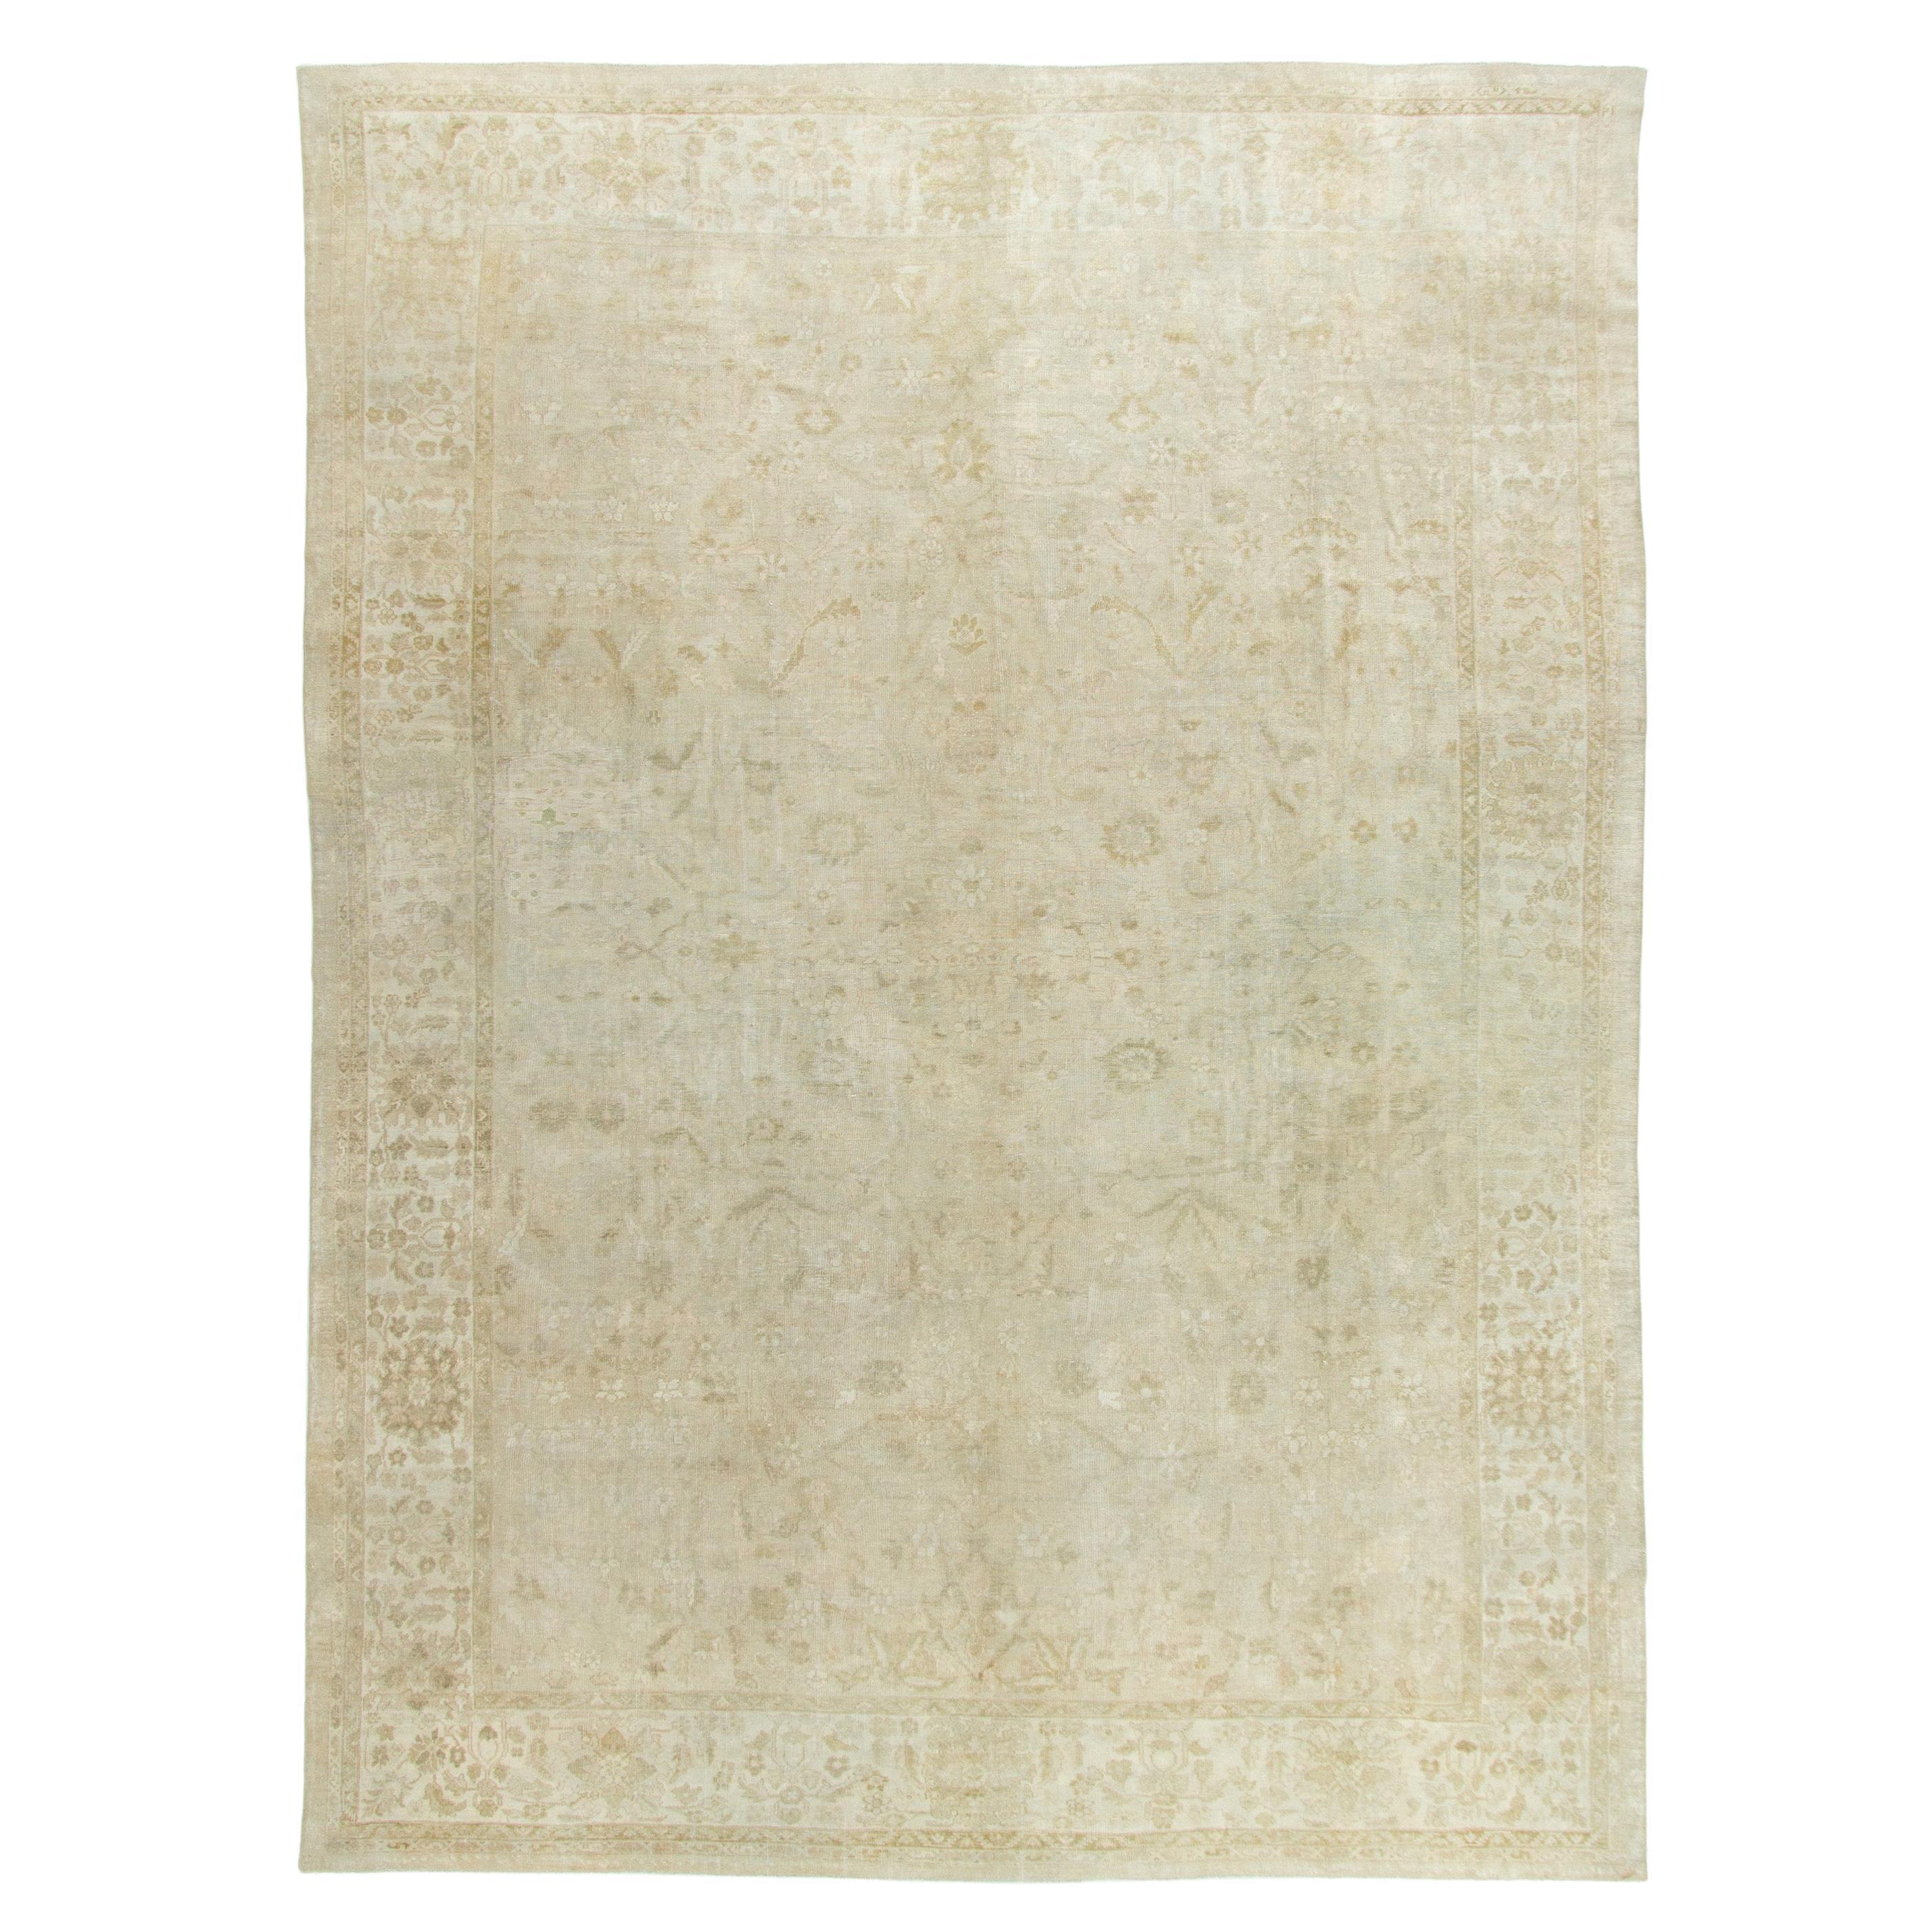 Antique Subdued Sultanabad Rug 11' X 15'6